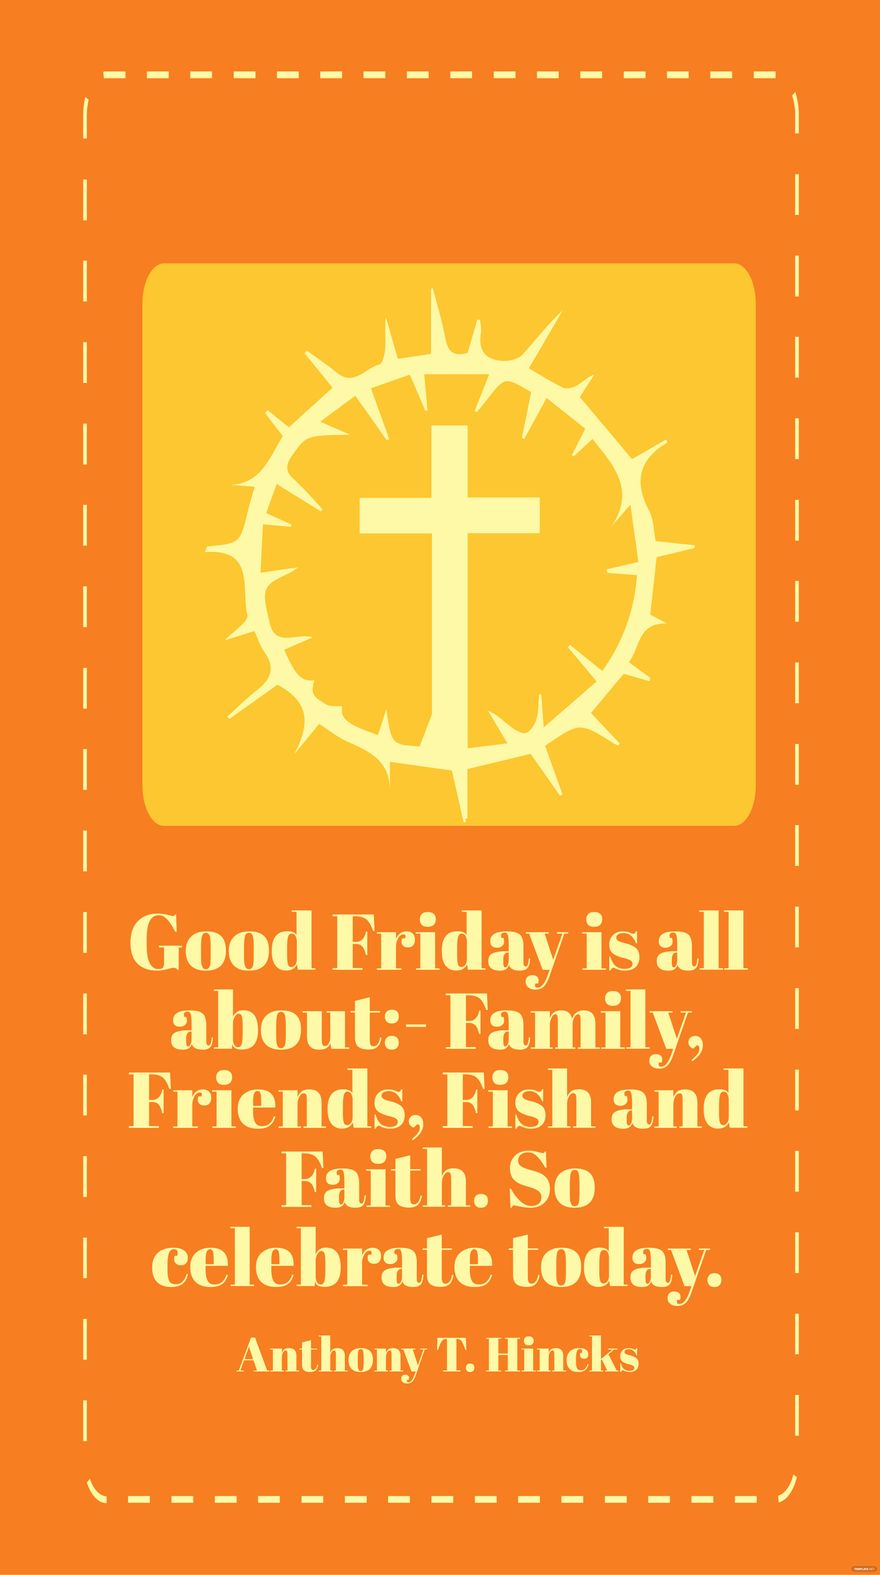 Anthony T. Hincks - Good Friday is all about:- Family, Friends, Fish and Faith. So celebrate today. in JPG